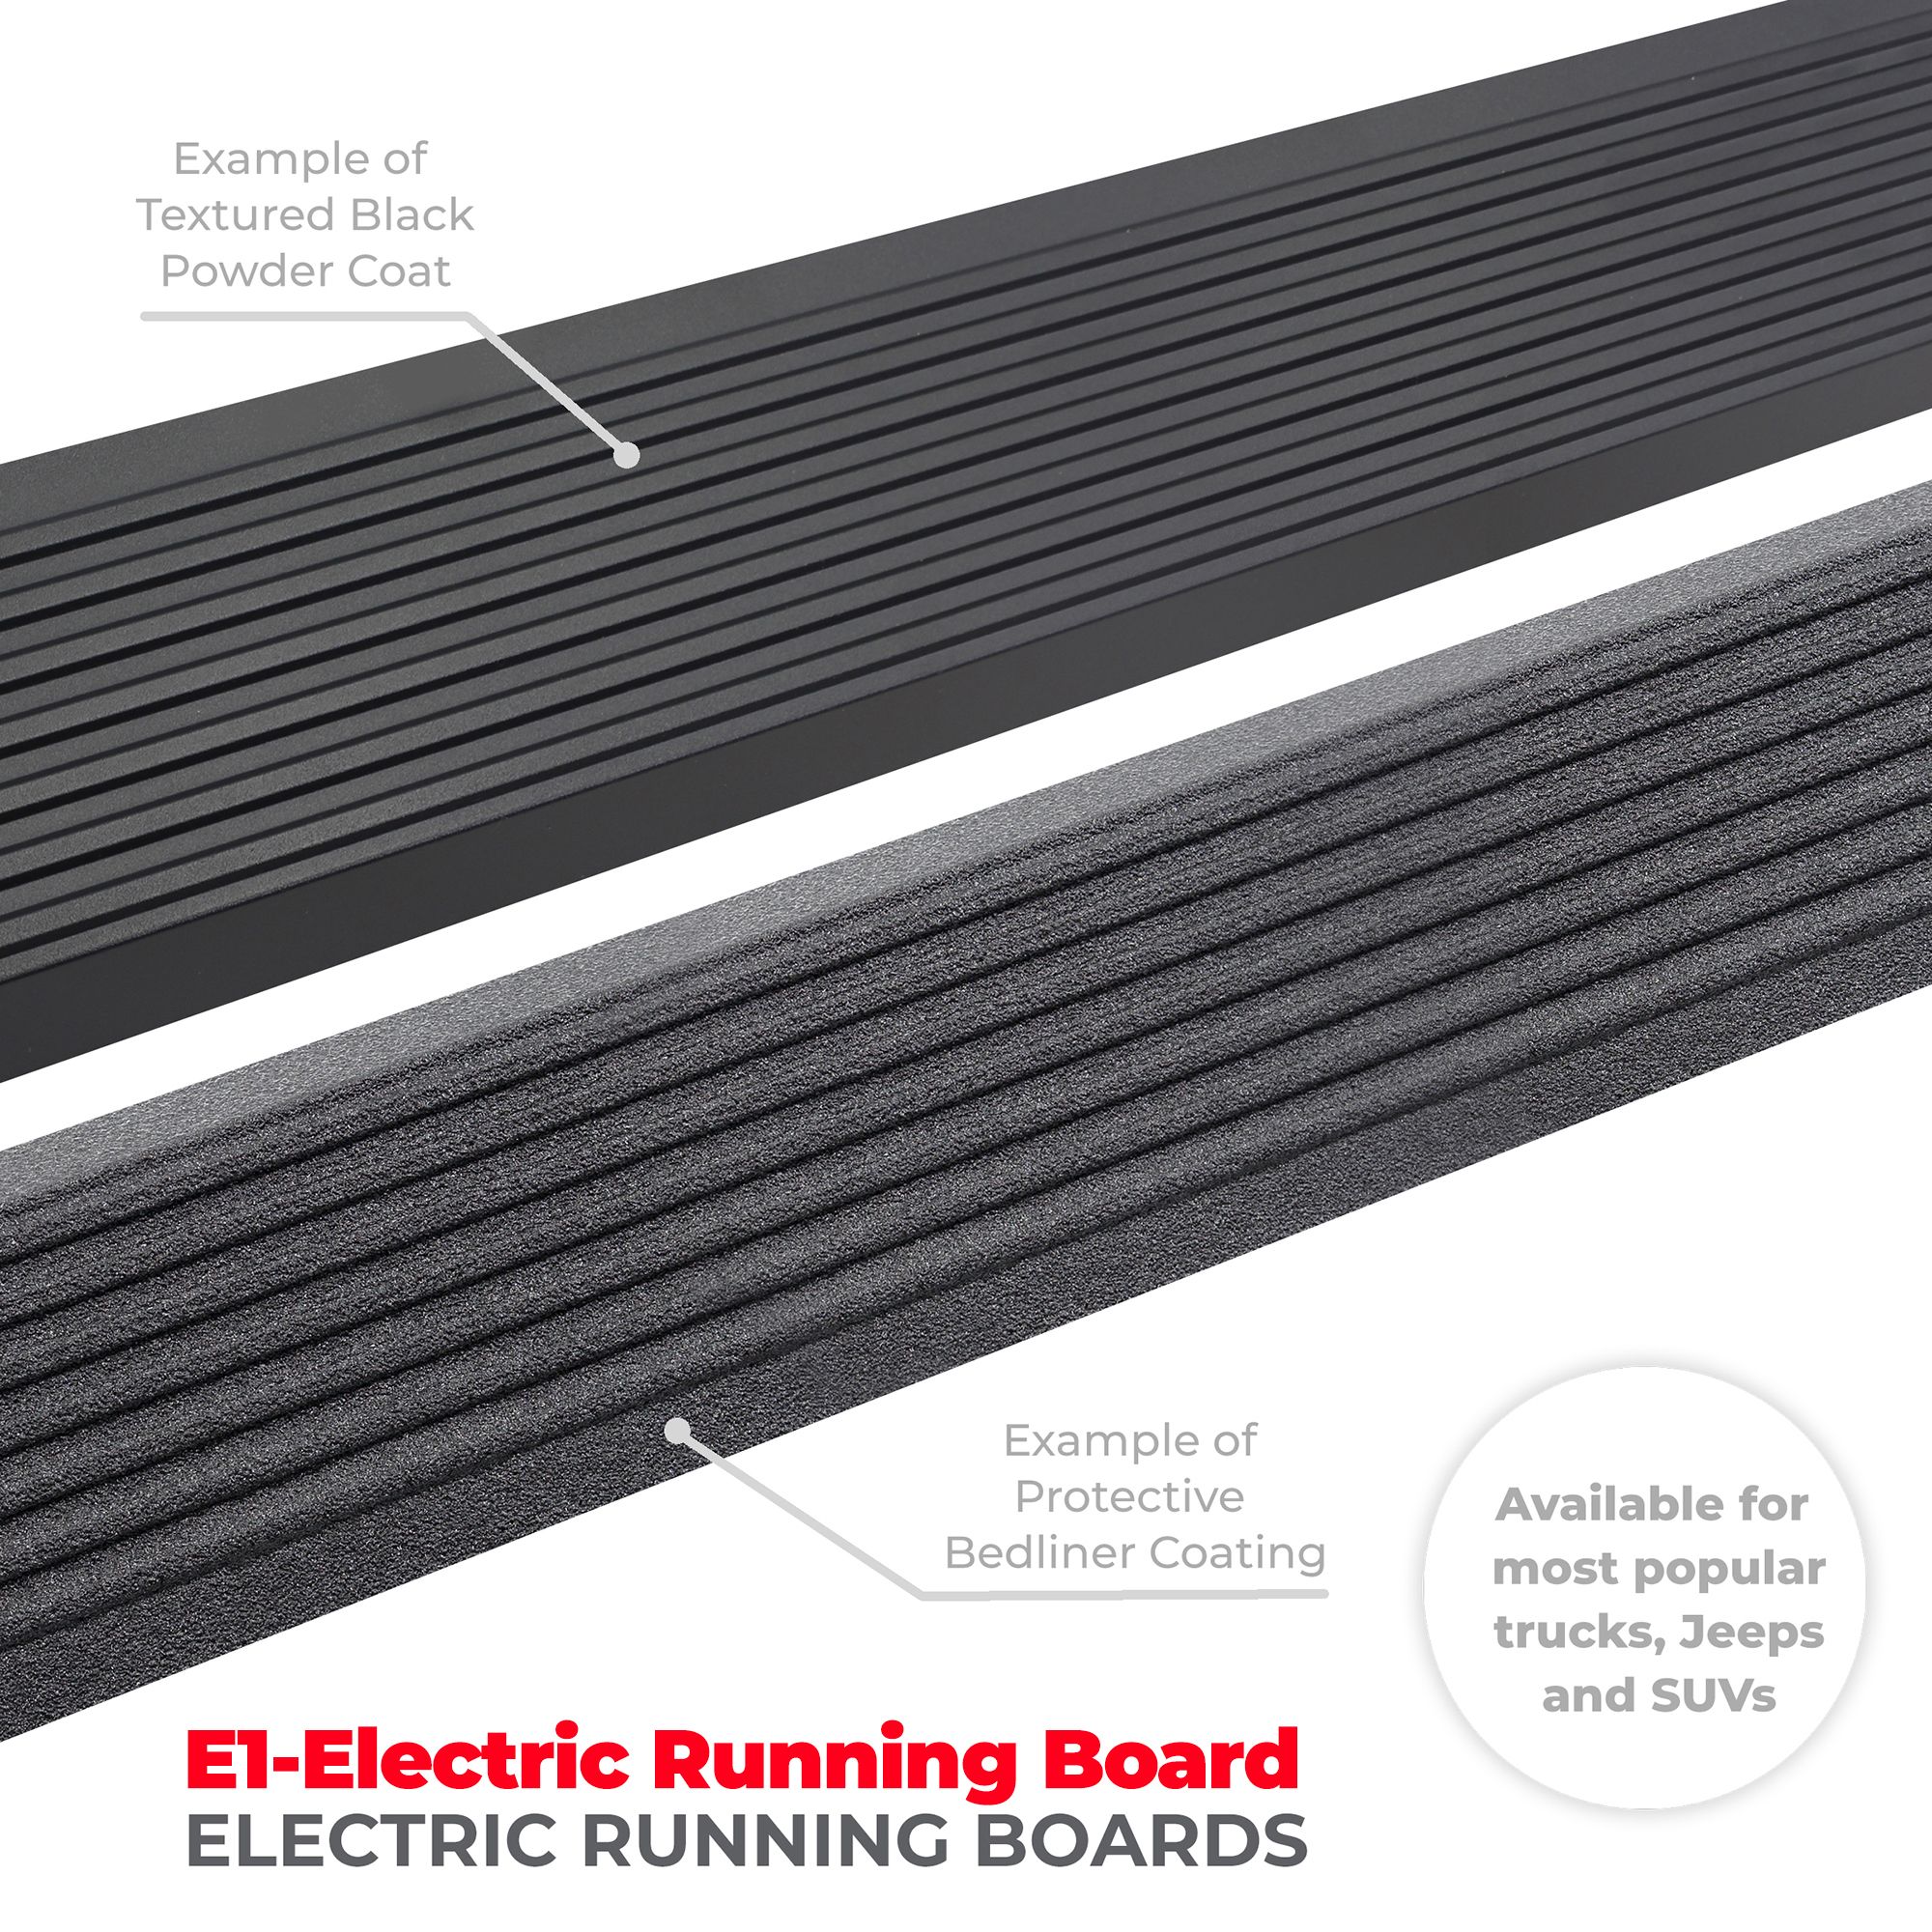 Go Rhino 20404880T - E1 Electric Running Boards With Mounting Brackets - Protective Bedliner Coating